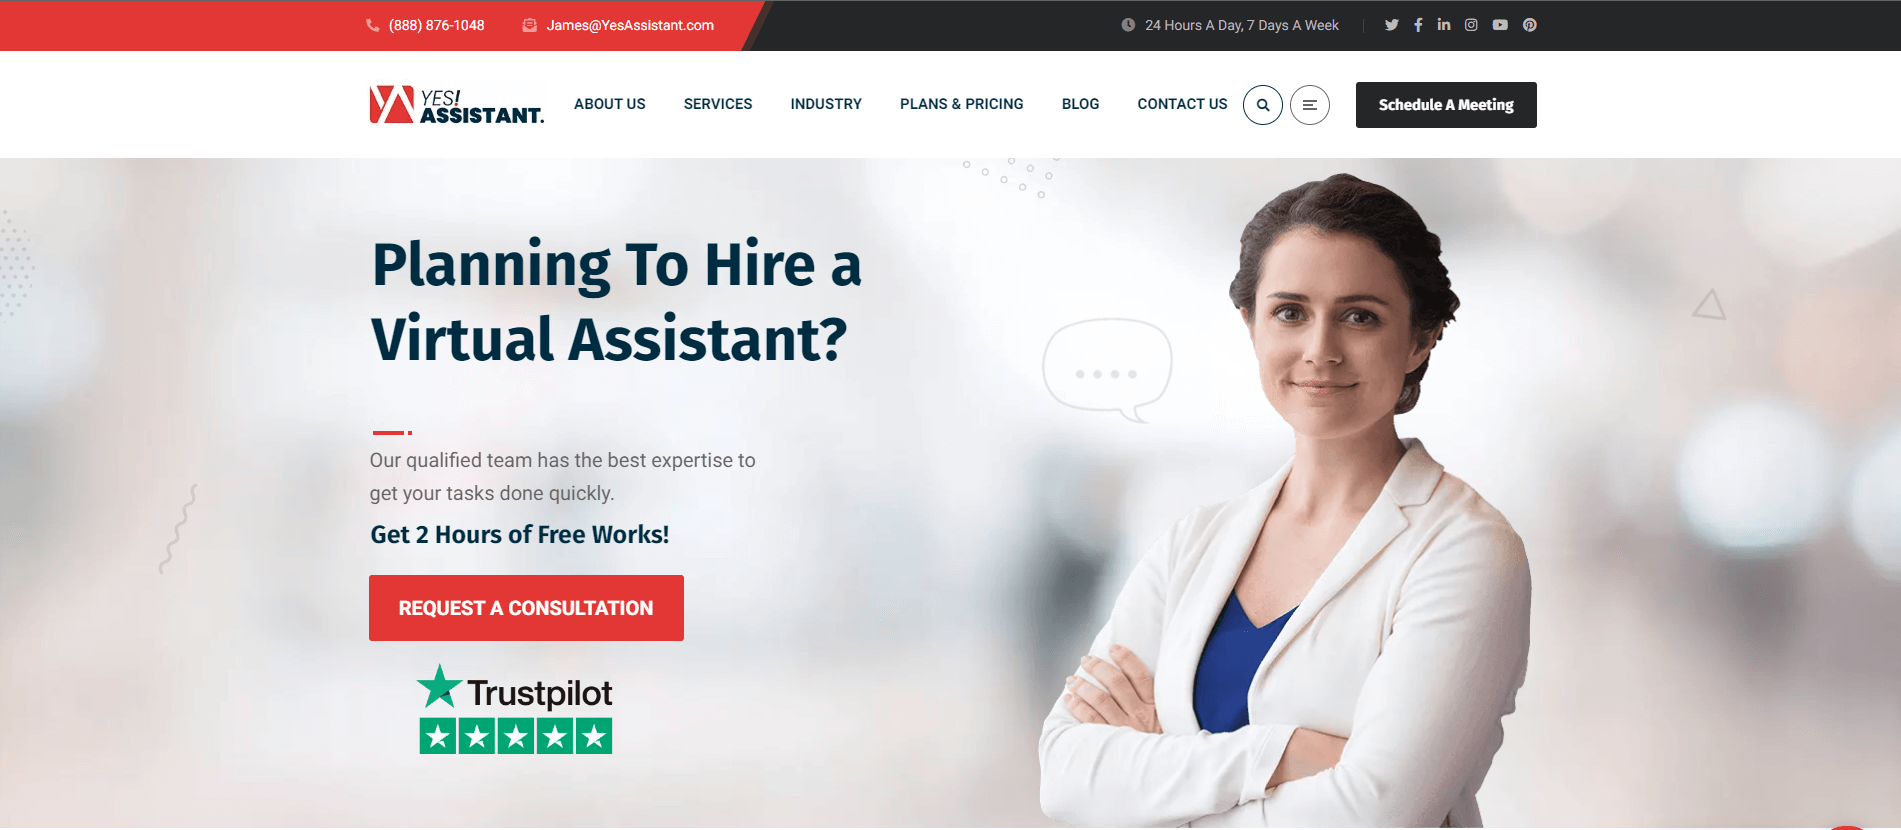 YesAssistant.com